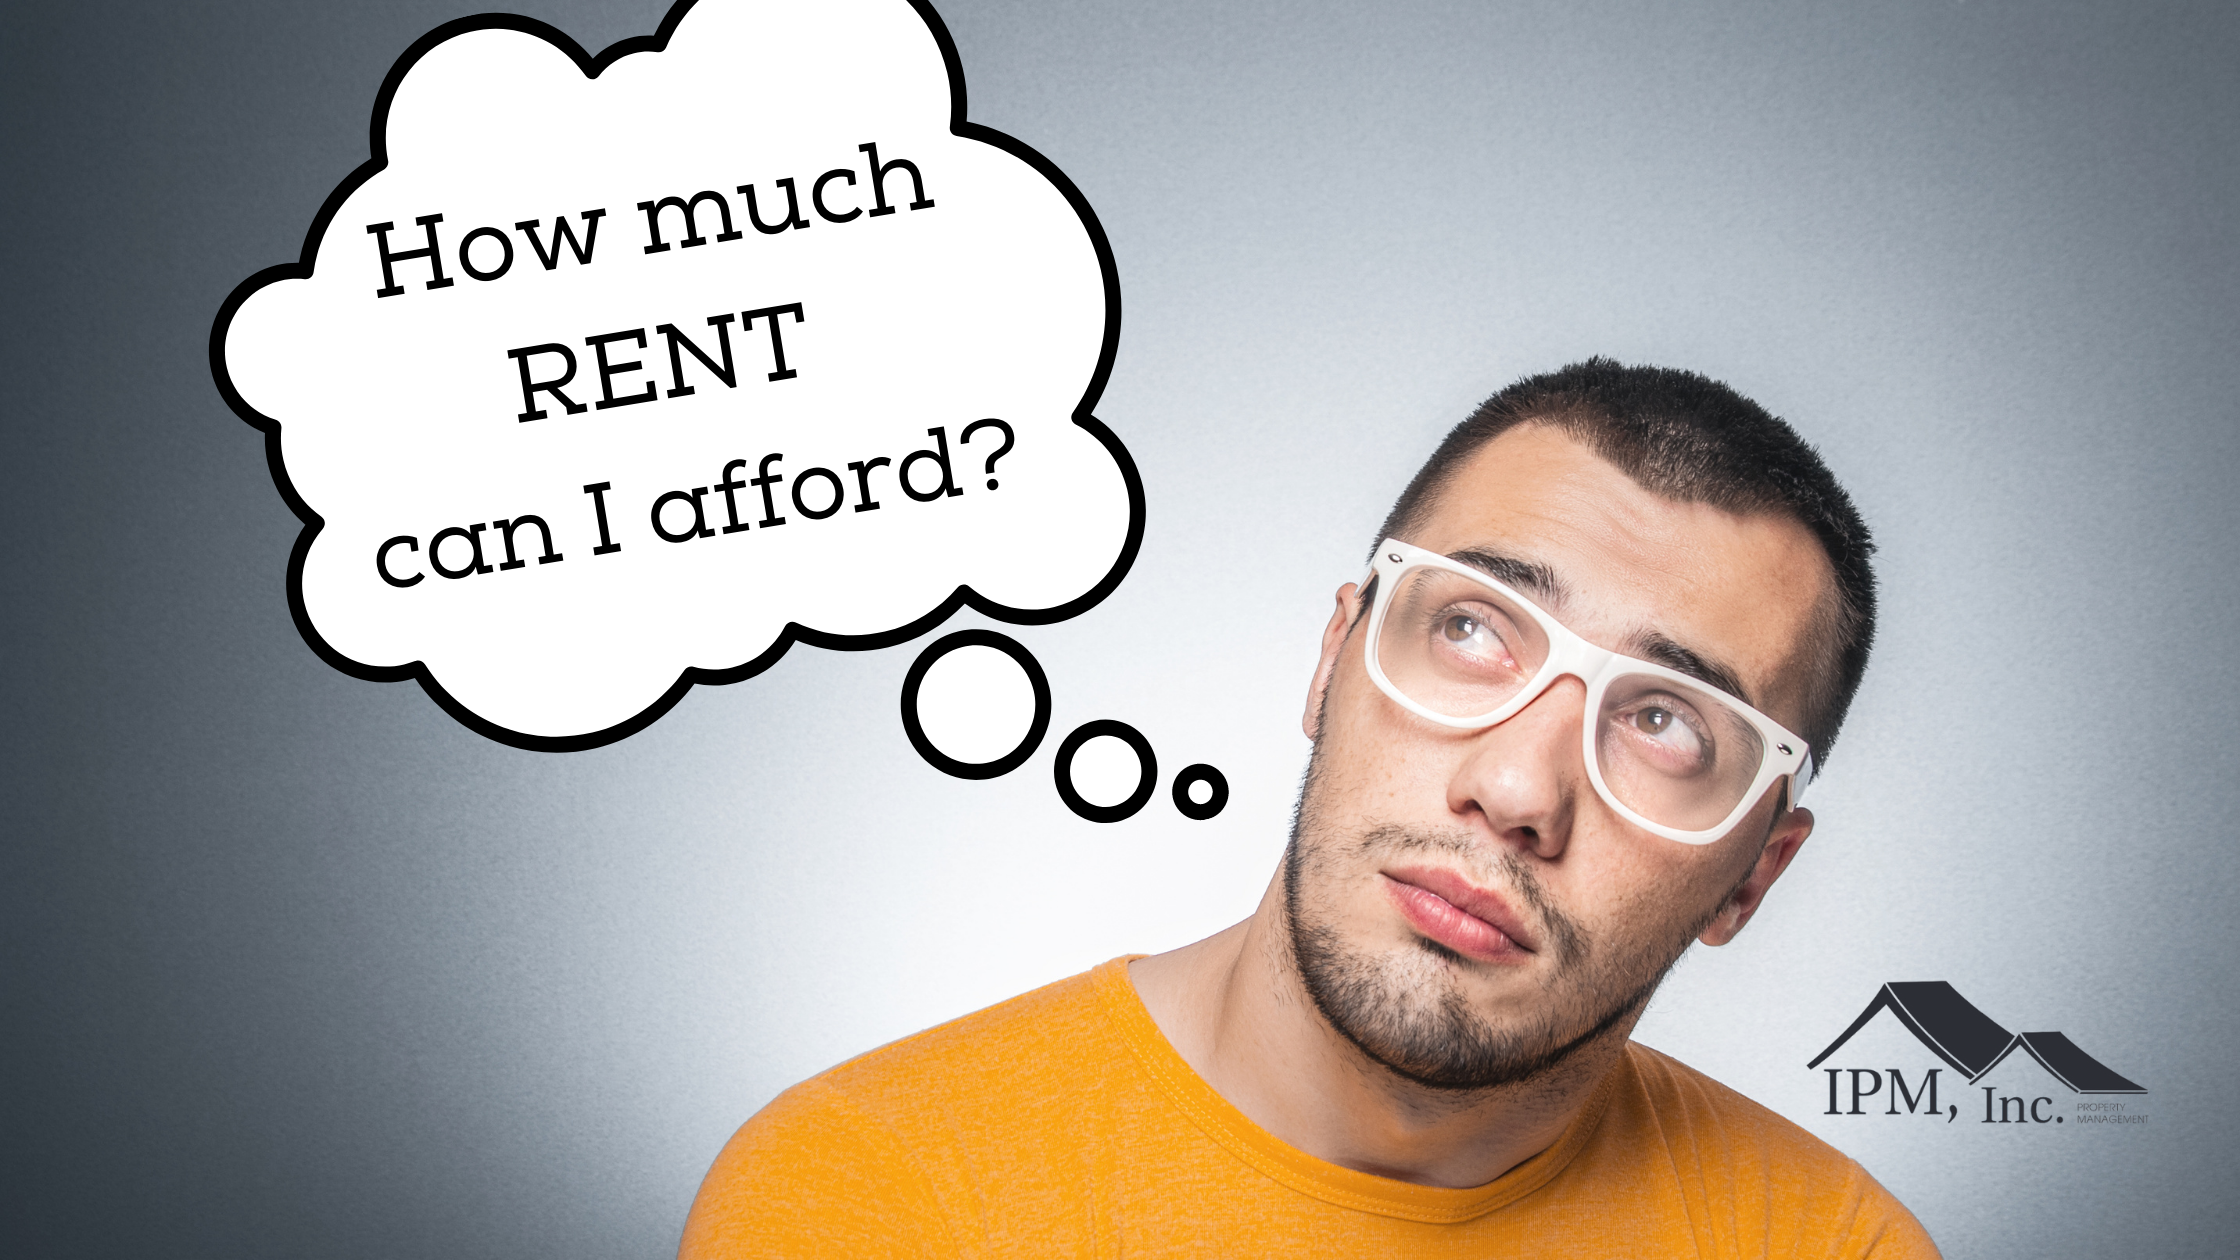 How Much Rent can I AFFORD?